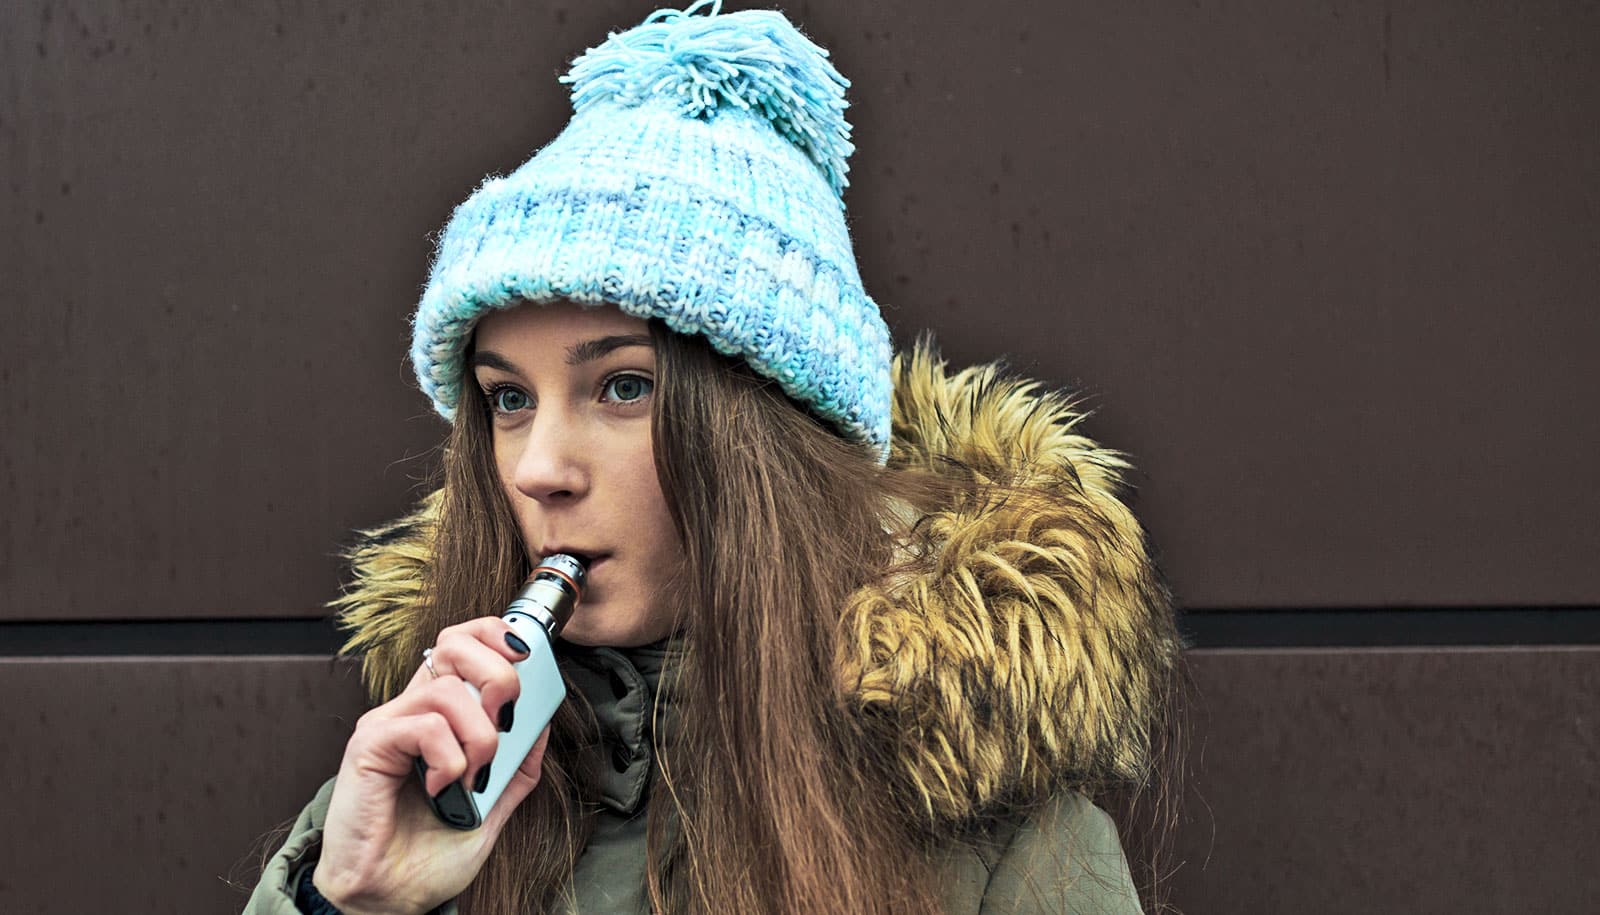 A young woman in winter clothing vapes outside.